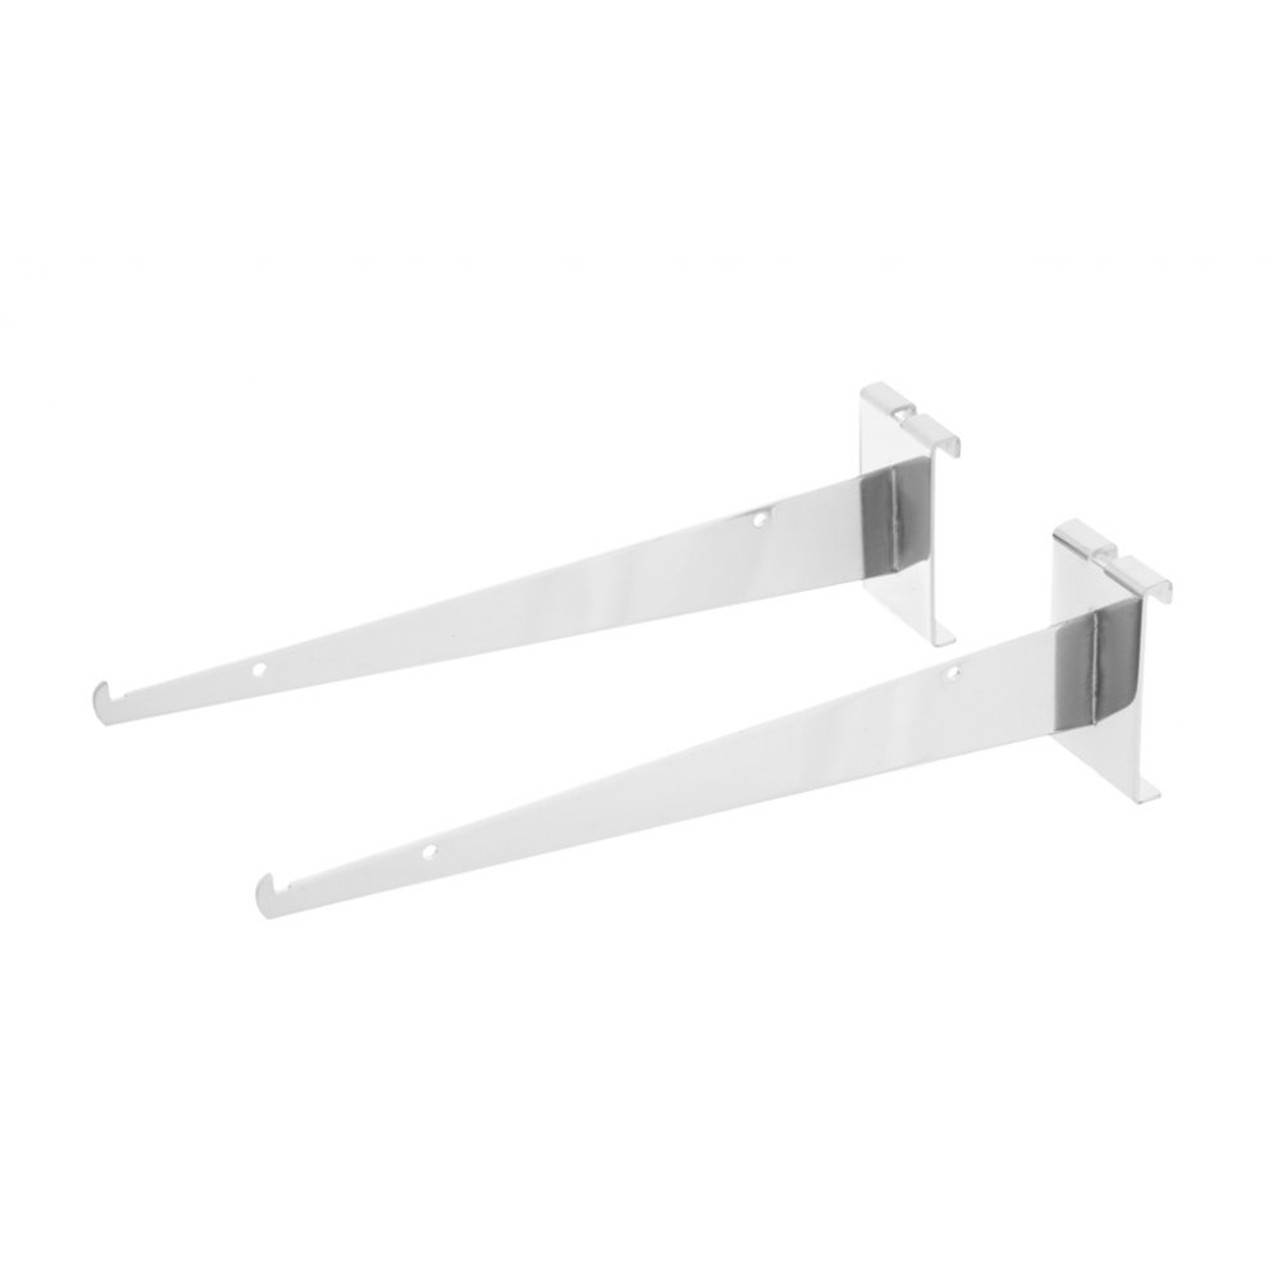 Acrylic Shelf Complete With Brackets For Grid Mesh Panels - W600 x D300mm